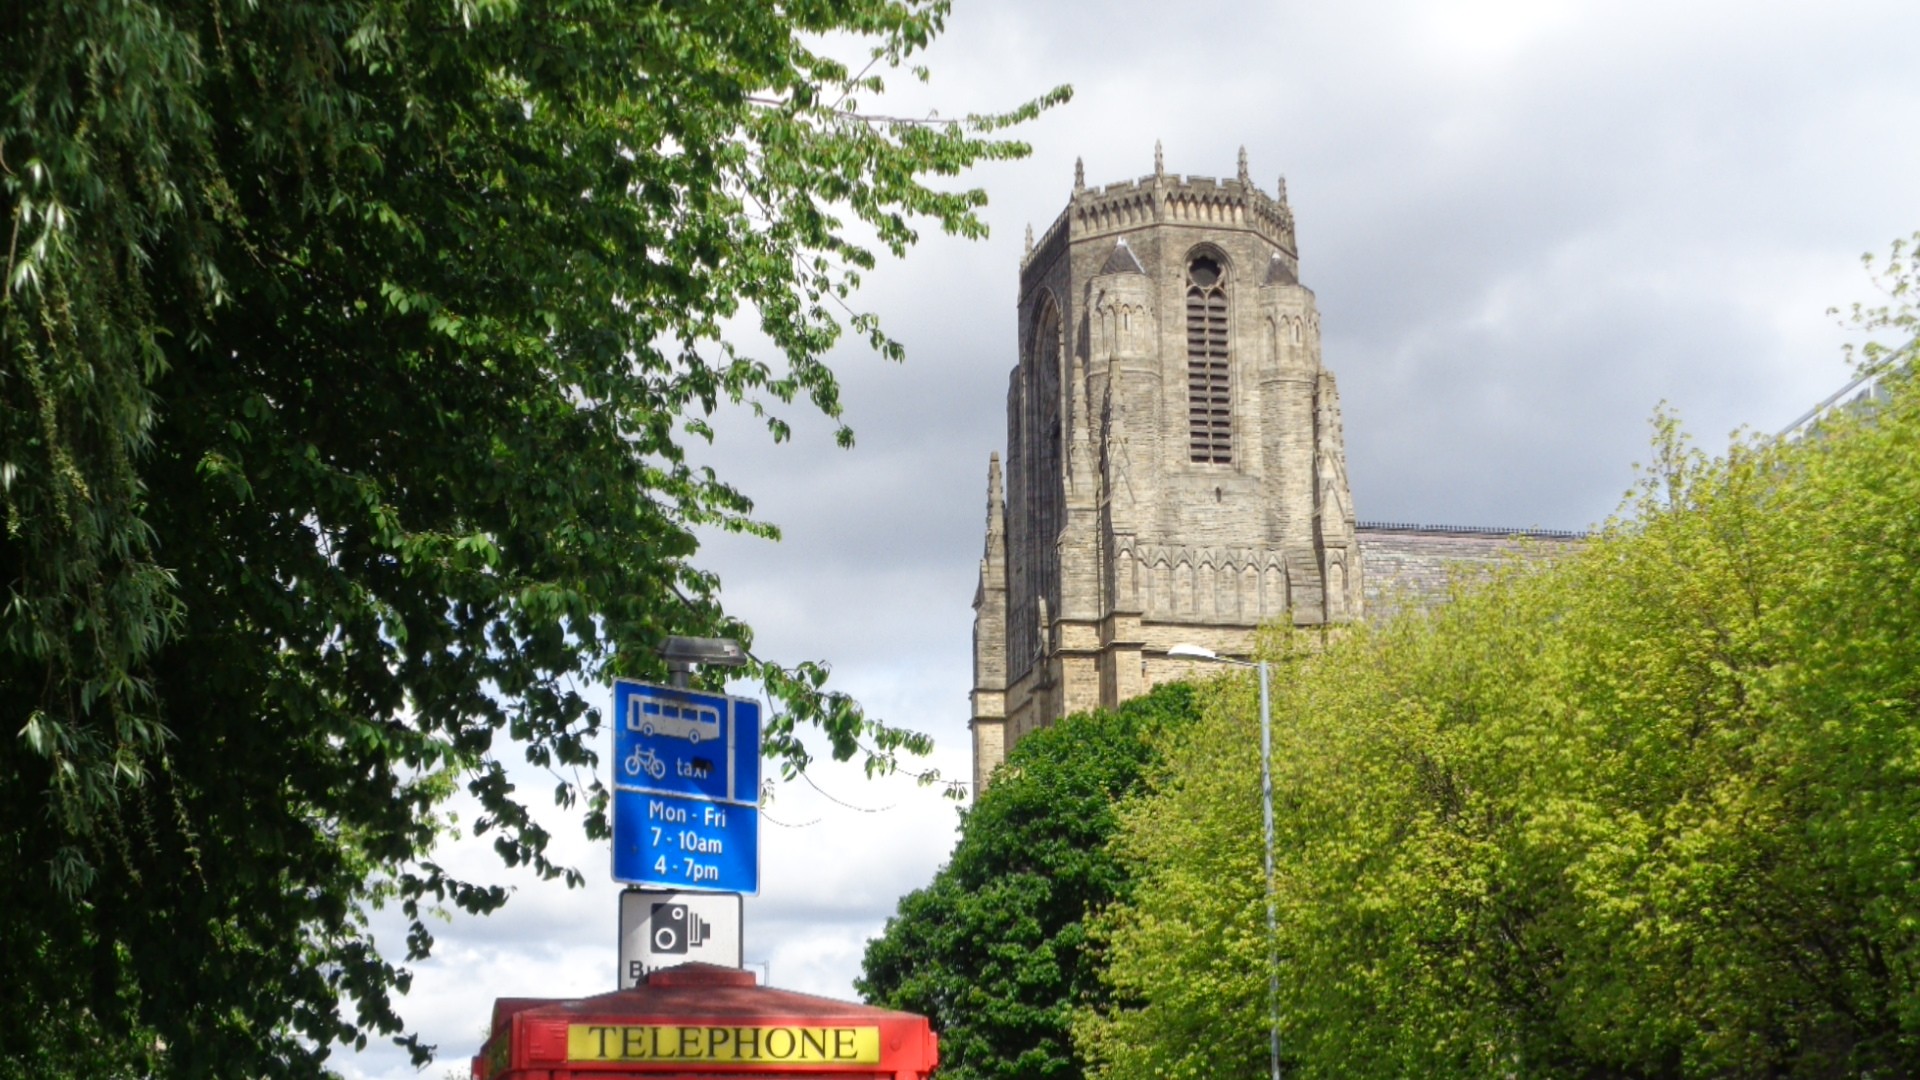 General 1920x1080 city old building church Manchester urban road sign holy name church University of Manchester UK England